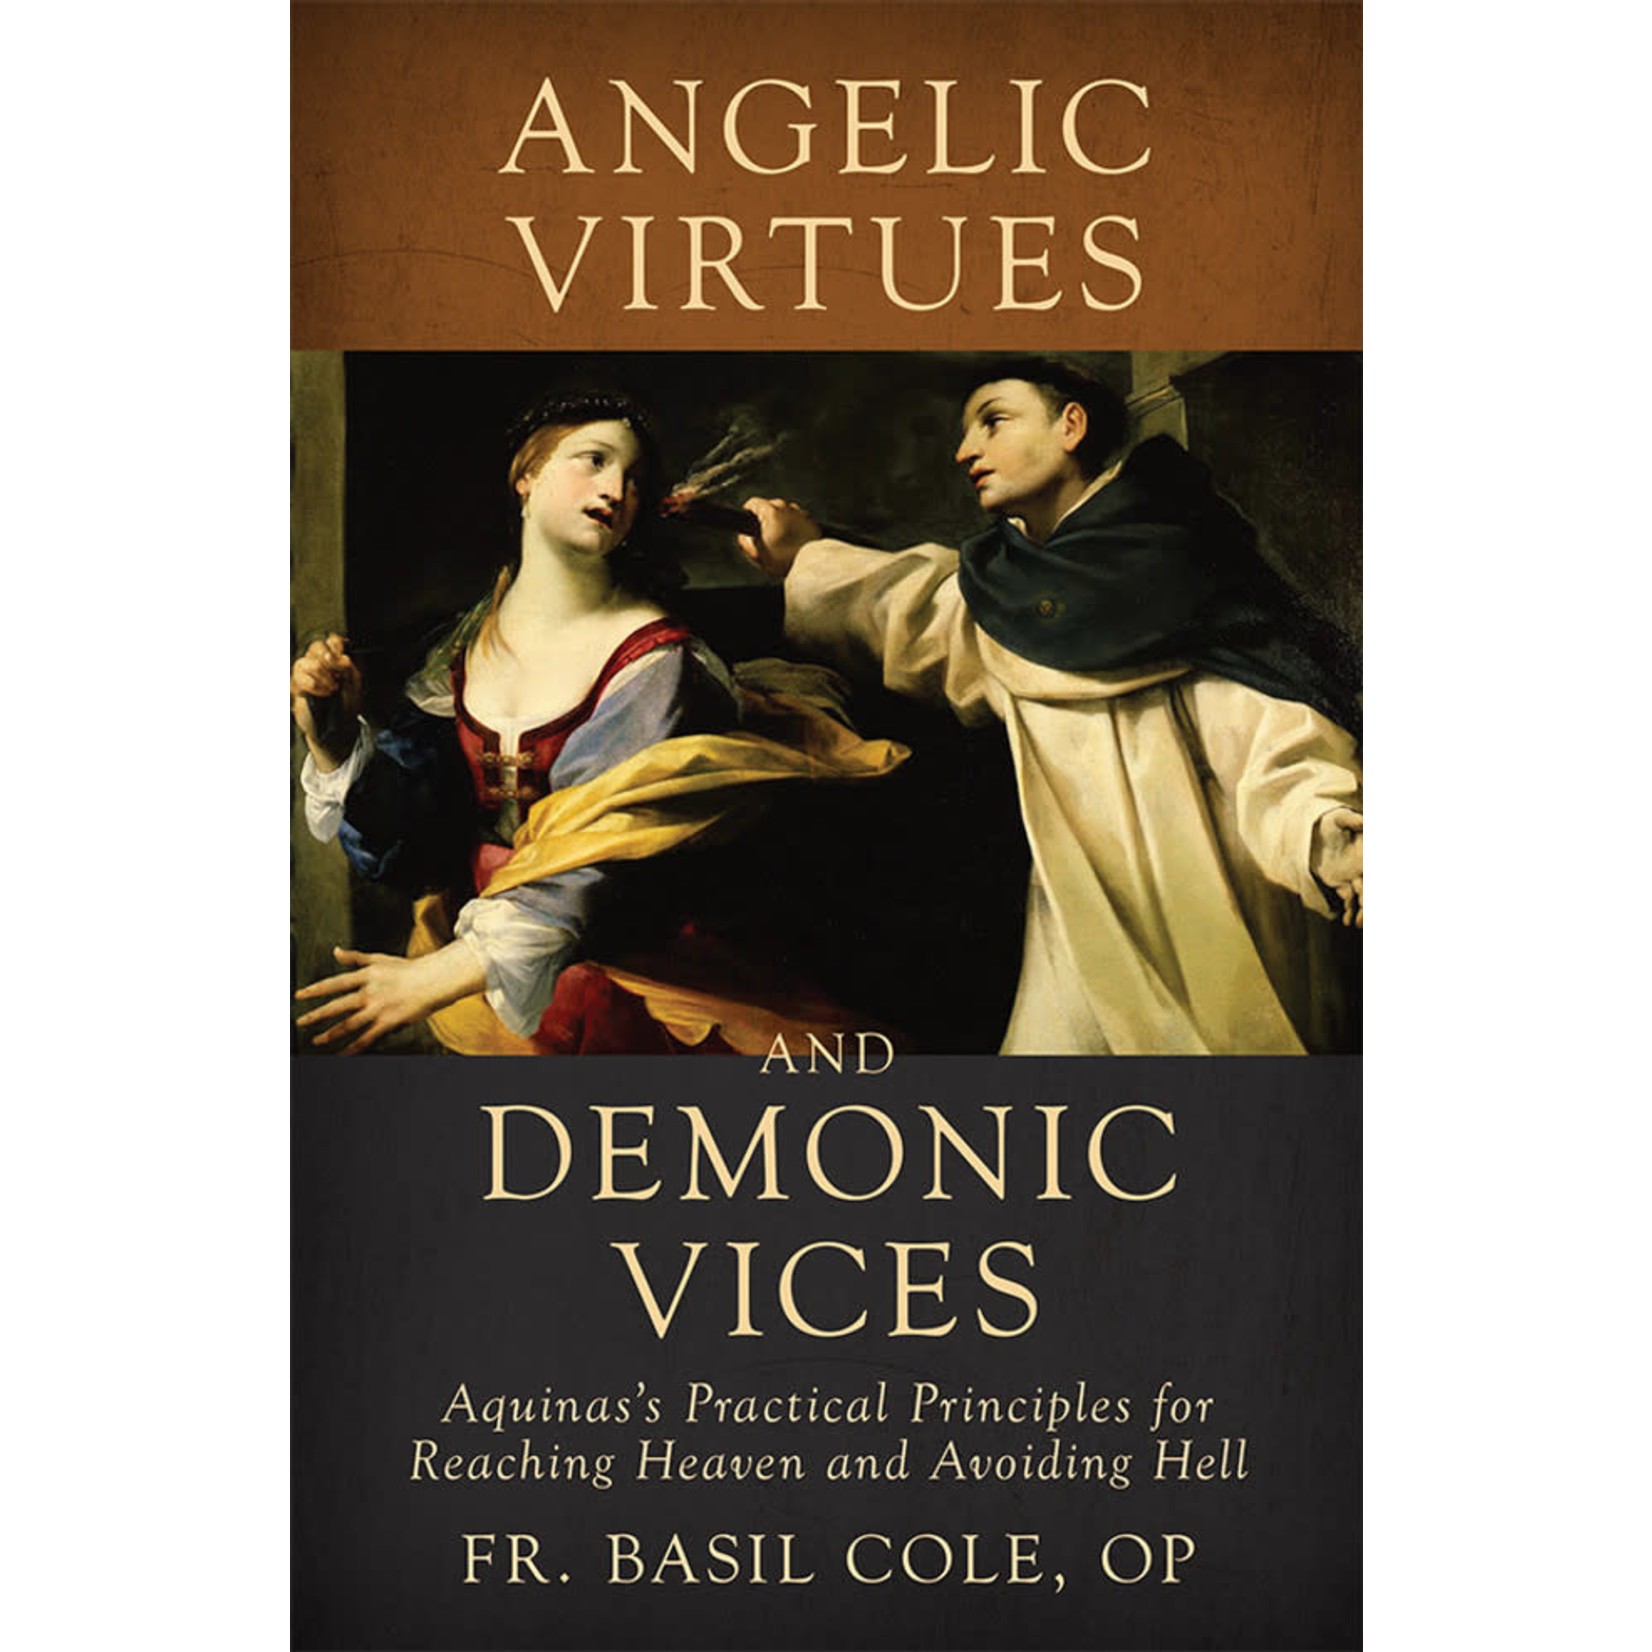 Angelic Virtues and Demonic Vices